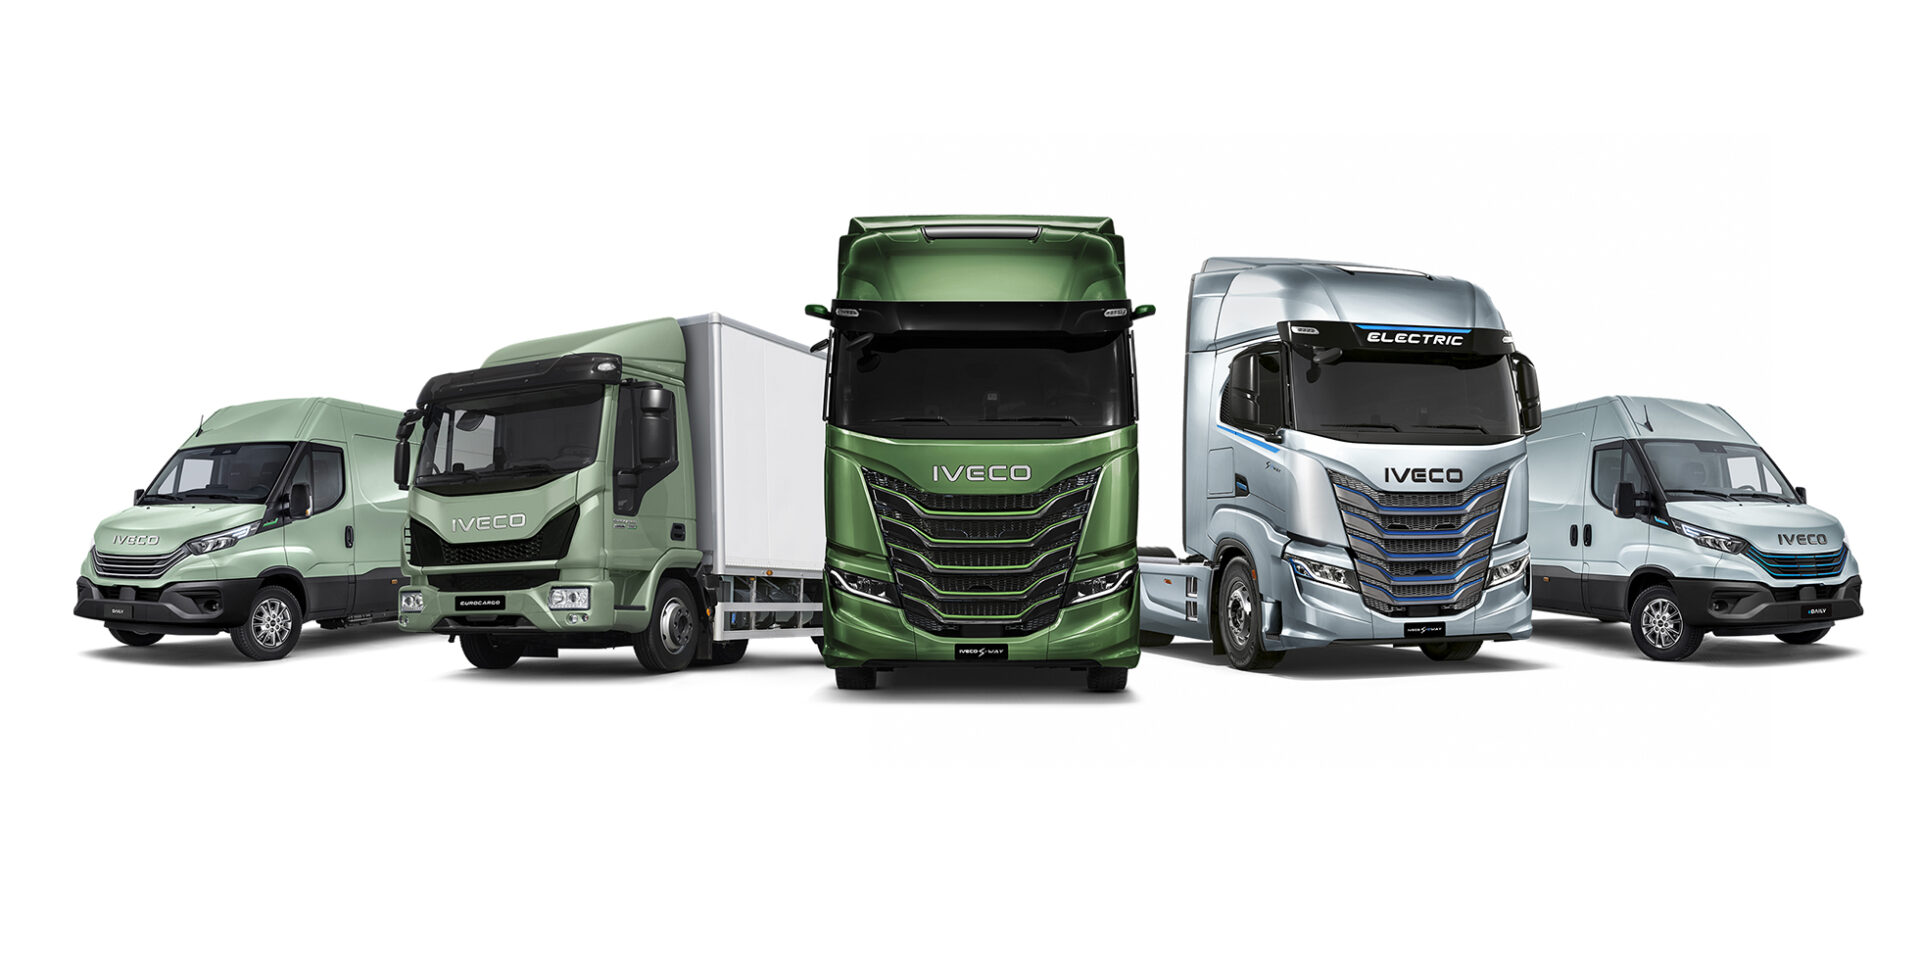 Foto: Iveco Group